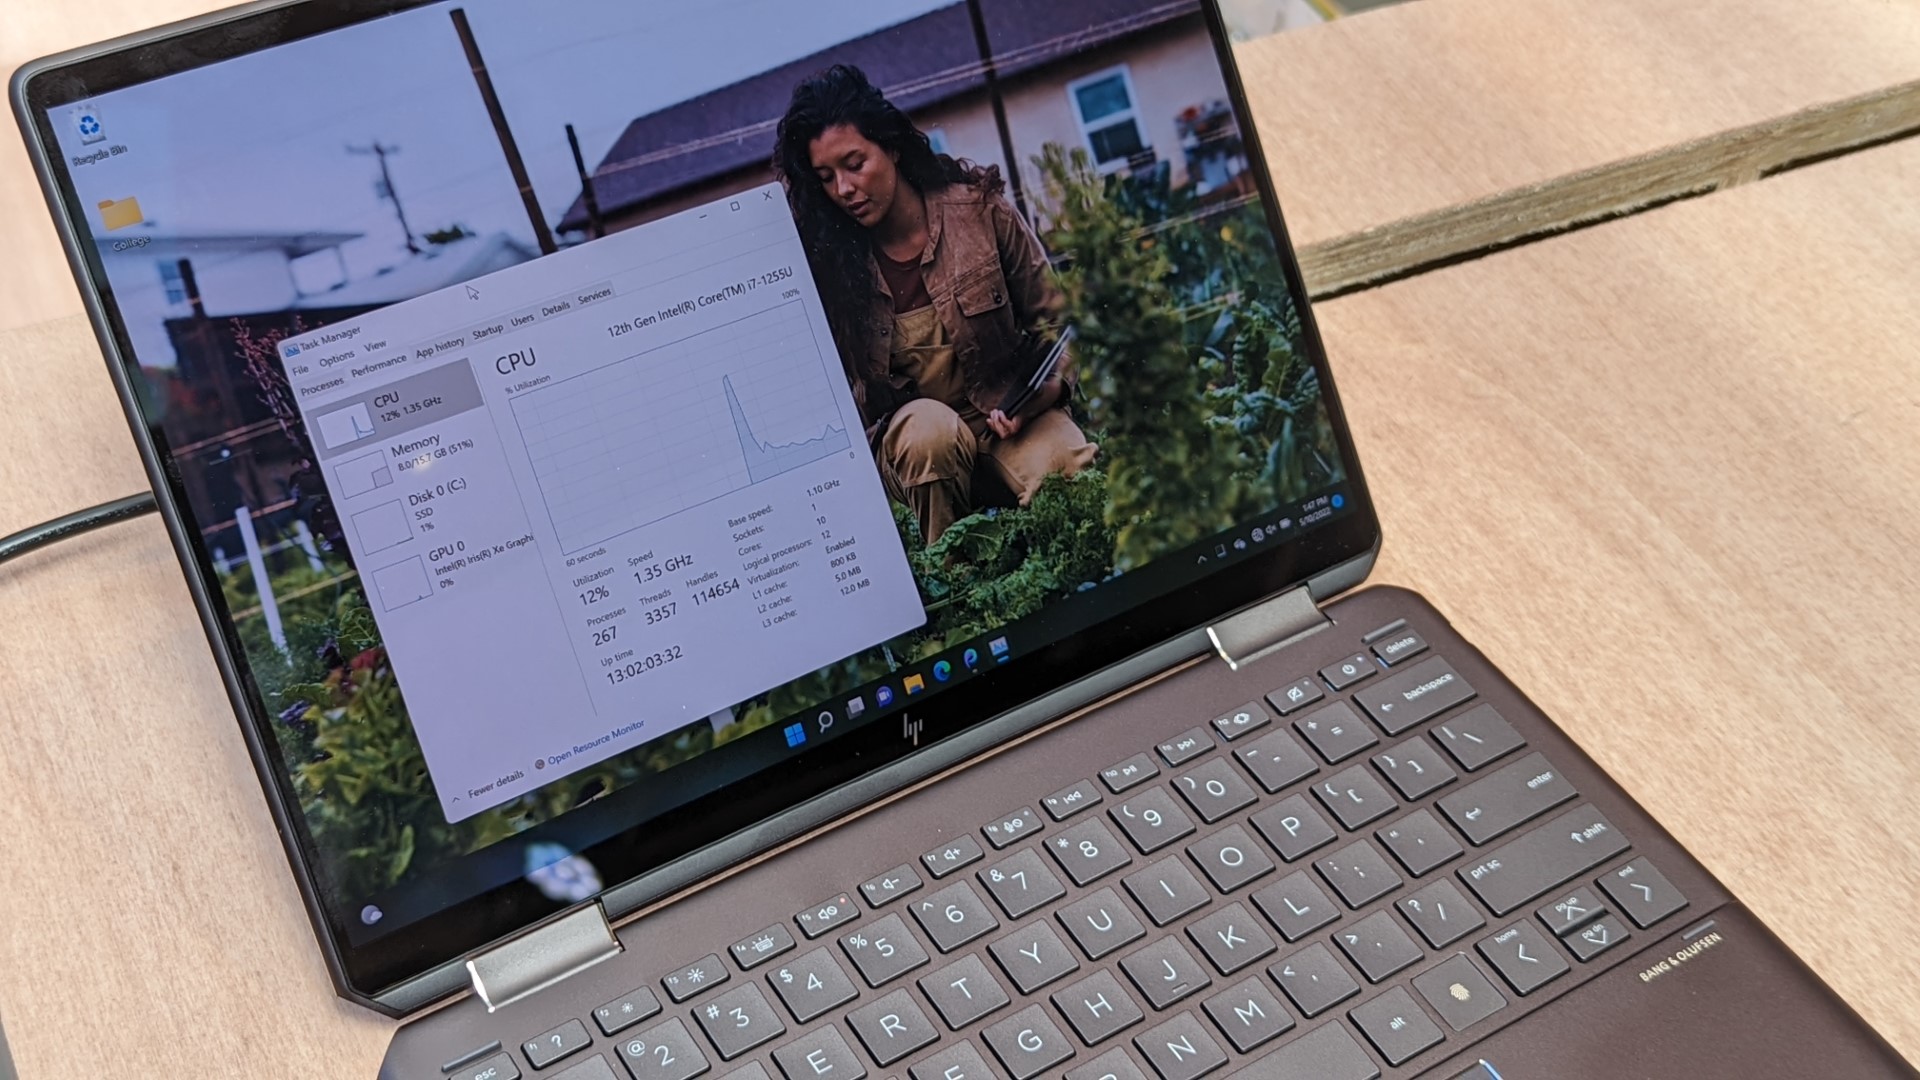 HP Spectre x360 13.5 hands-on review: Refinements galore | Digital Trends